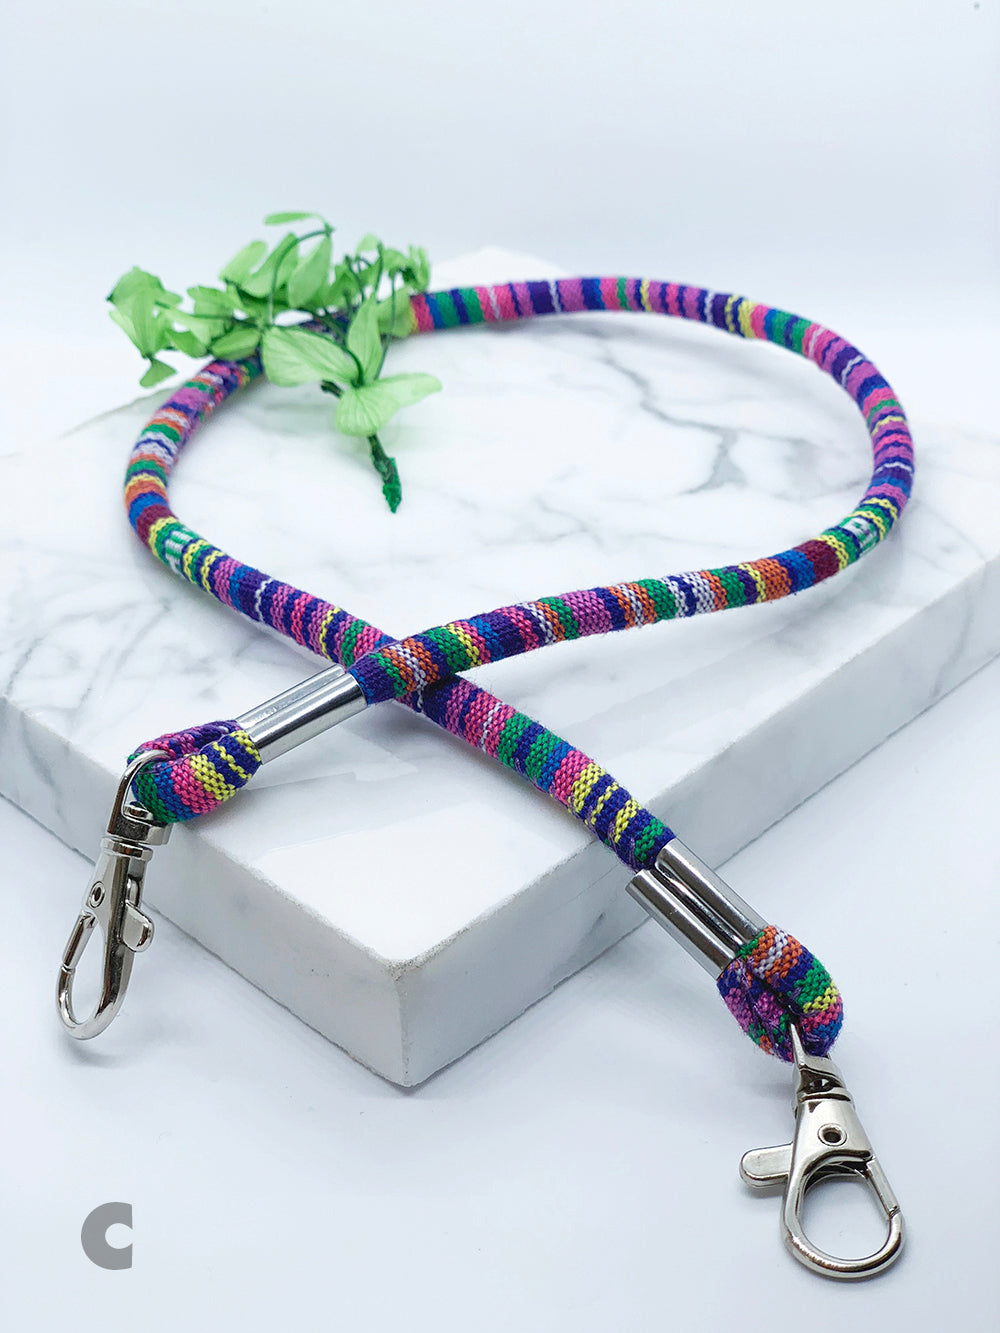 Colorful Lanyards for Masks